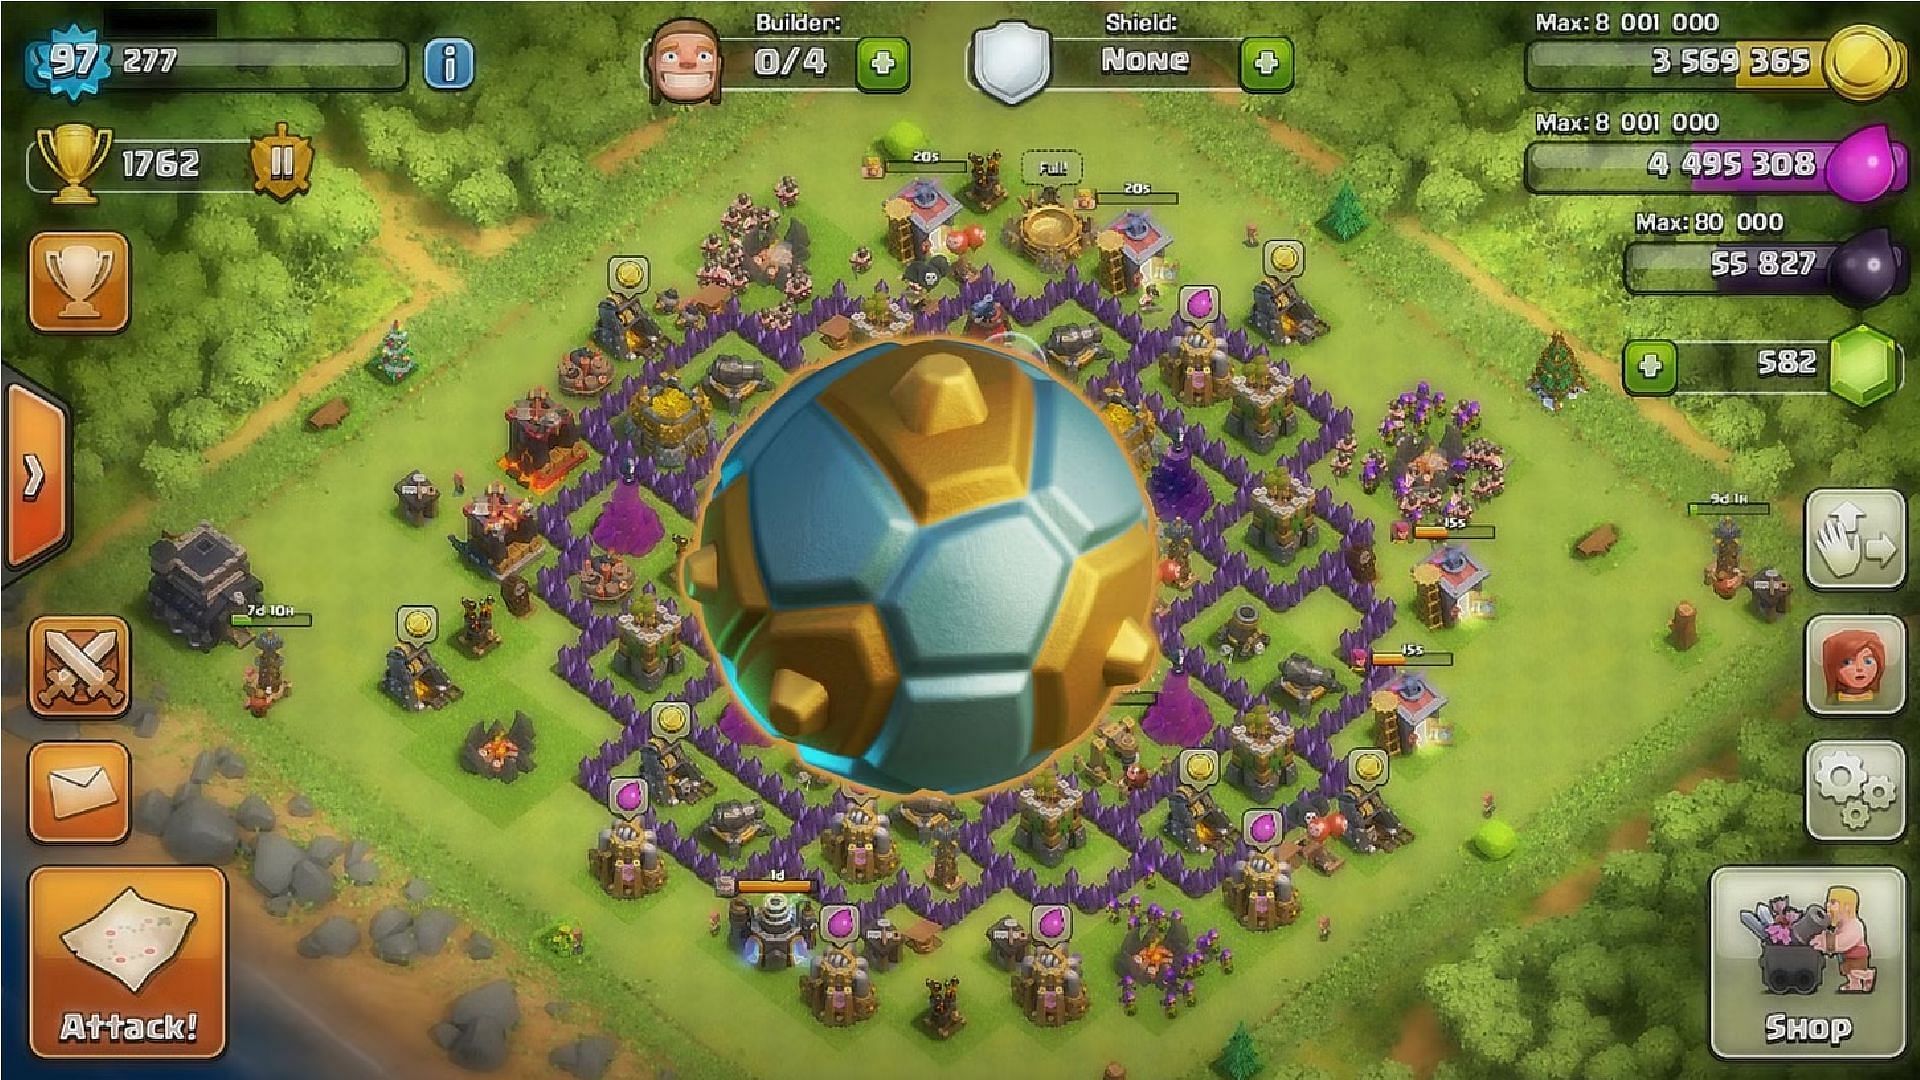 Spiky Ball Hero Equipment arrived with Clash with Haaland Medal event in COC (Image via Supercell)